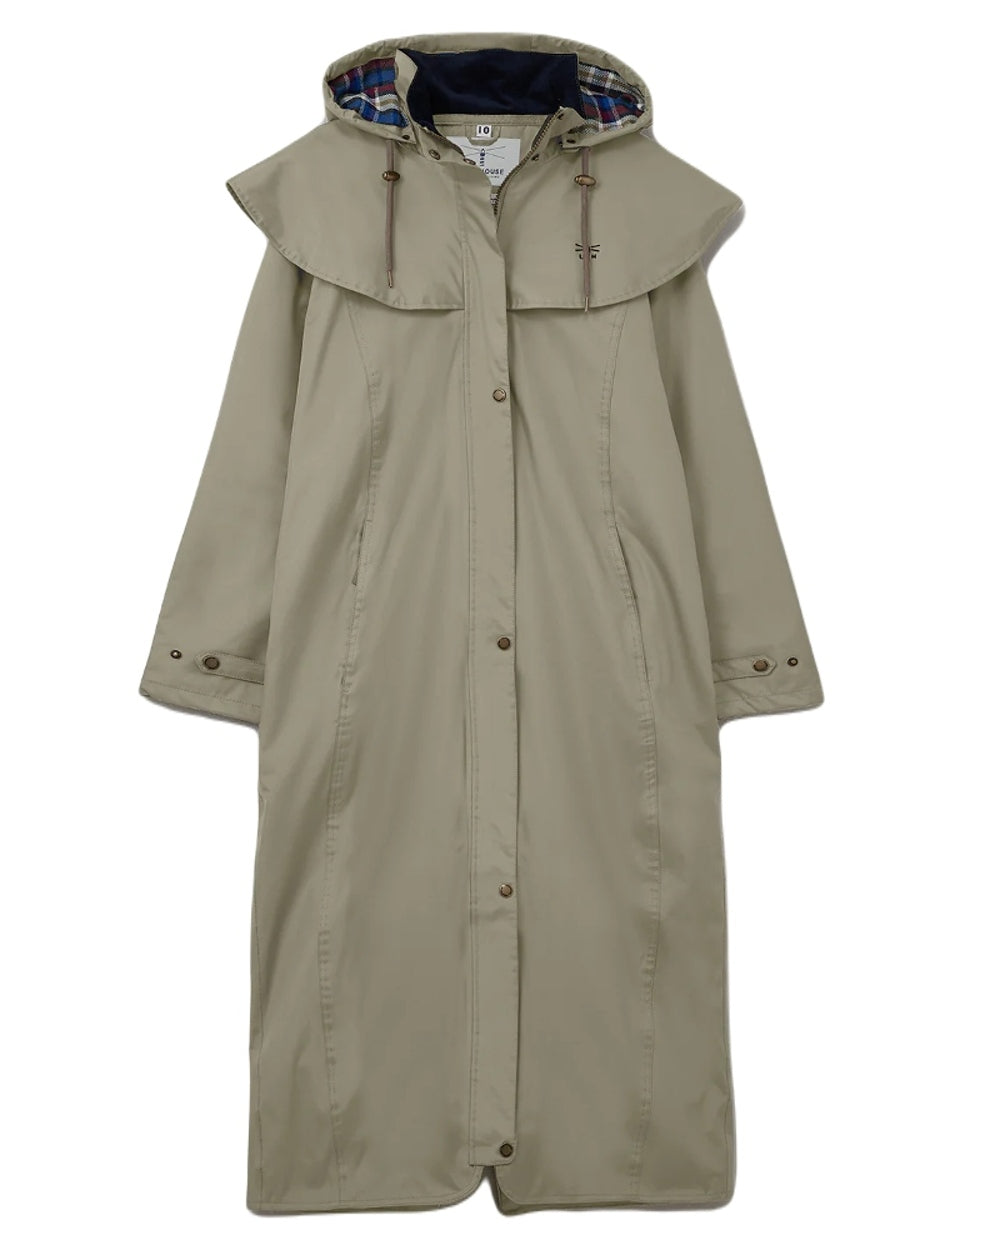 Lighthouse Outback Full Length Ladies Waterproof Raincoat in Fawn 